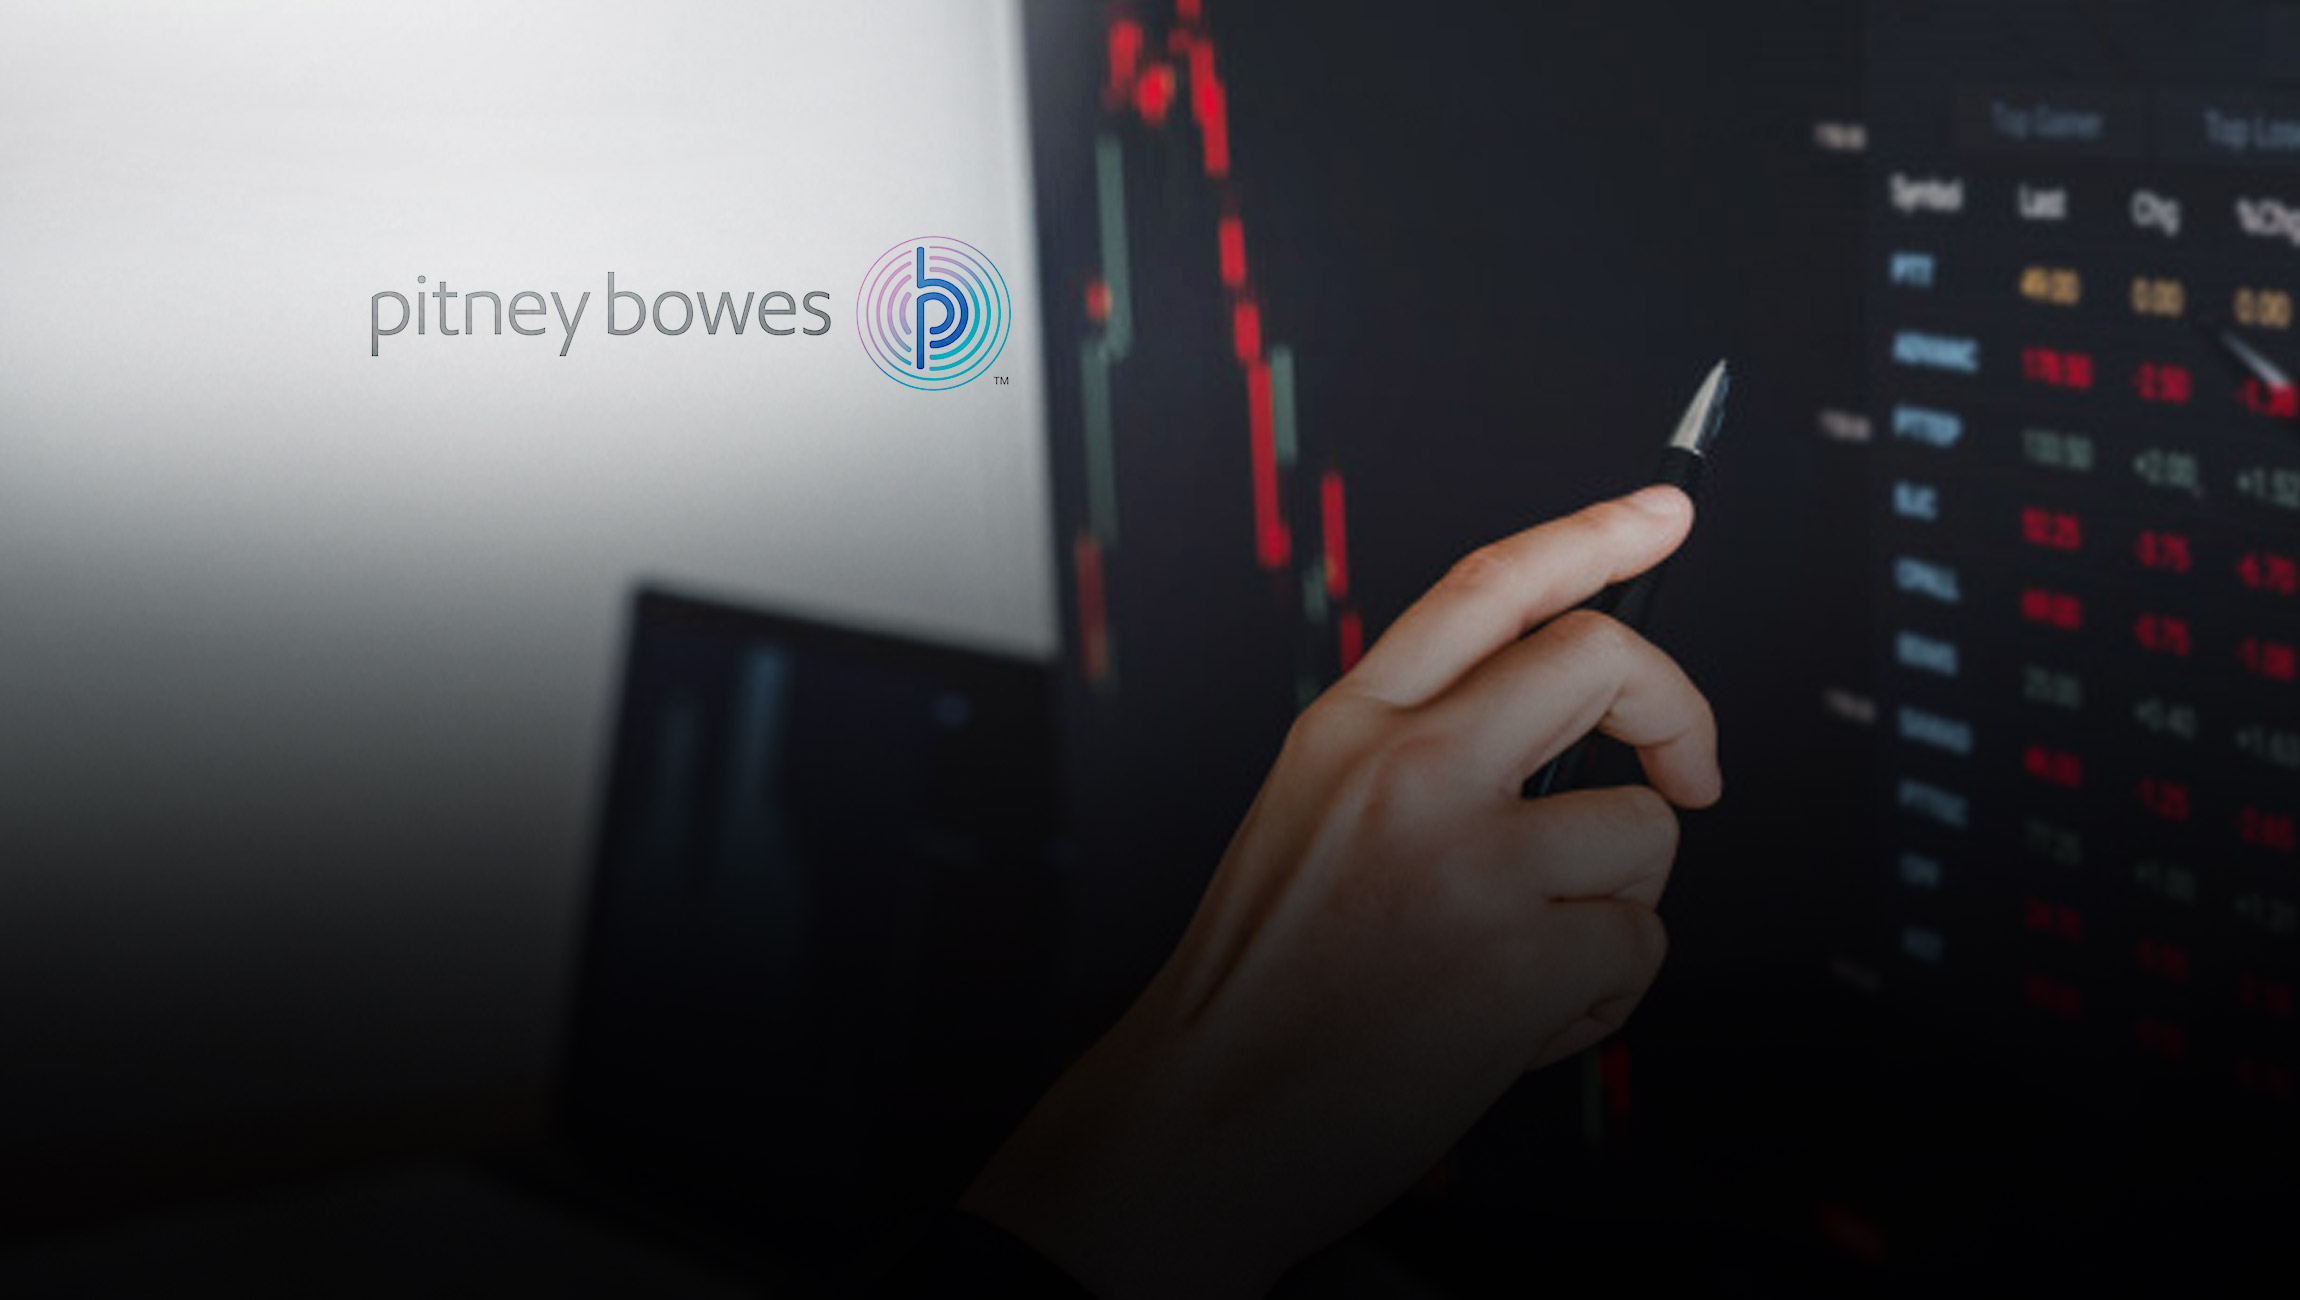 Pitney Bowes Announces Cash Tender Offers and Consent Solicitation